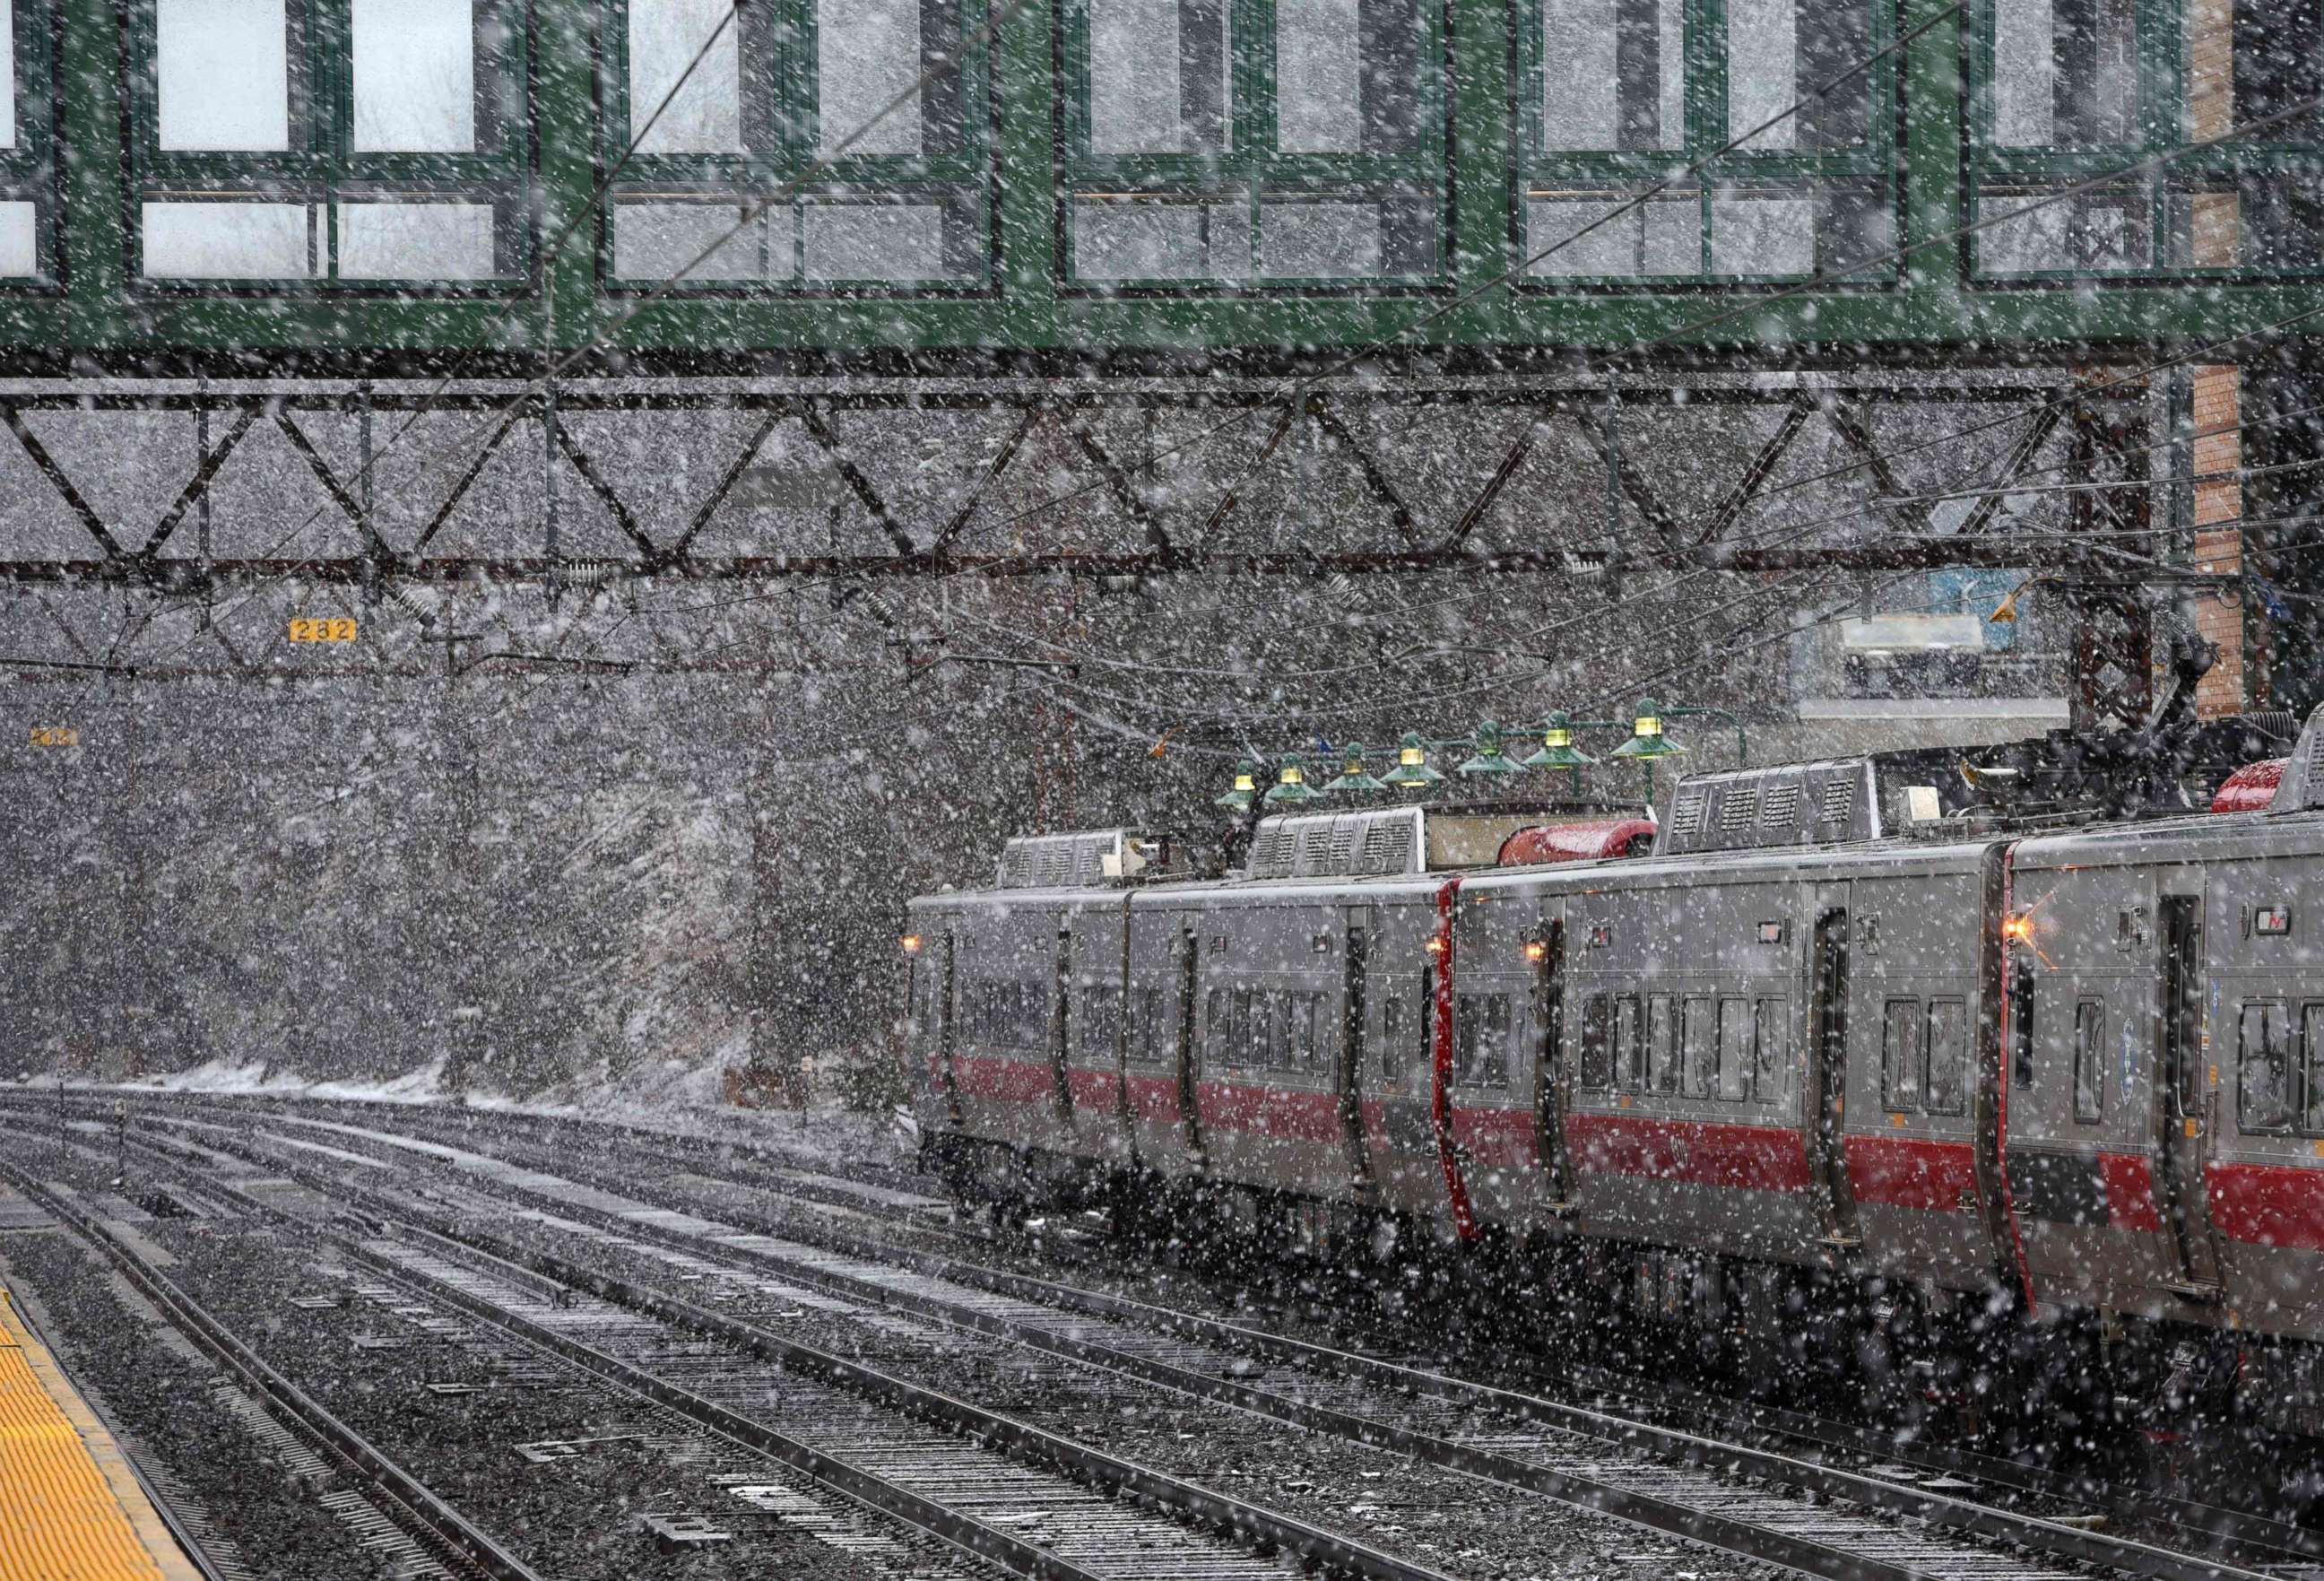 PHOTO: A New Haven Line Metro North train makes its way around a turn at the Metro North Station in Greenwich, Conn., March 13, 2018, as New England's third nor'easter in less than two weeks hits the area with the heaviest snow in the Boston area.